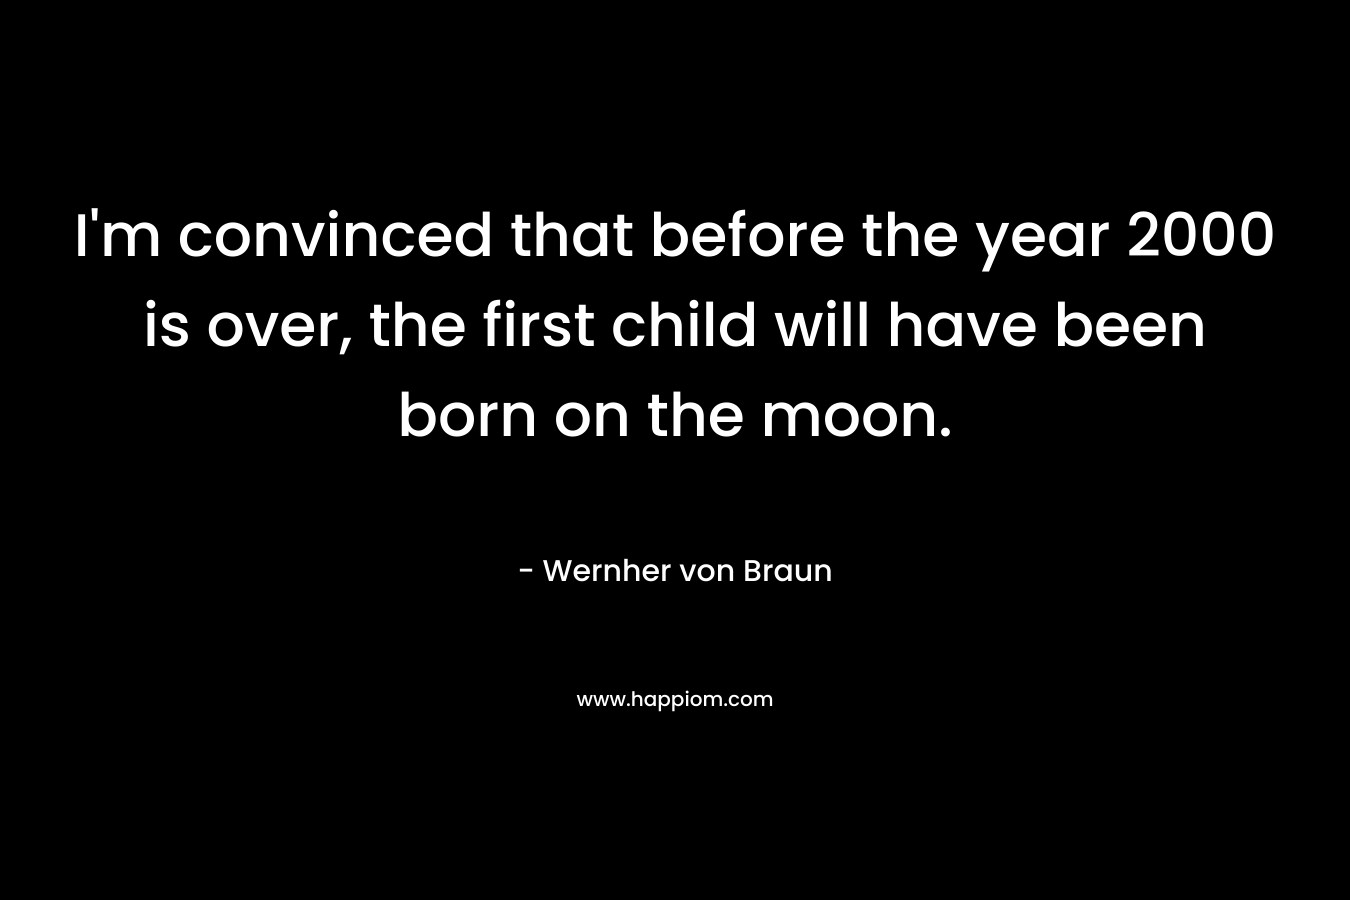 I'm convinced that before the year 2000 is over, the first child will have been born on the moon.